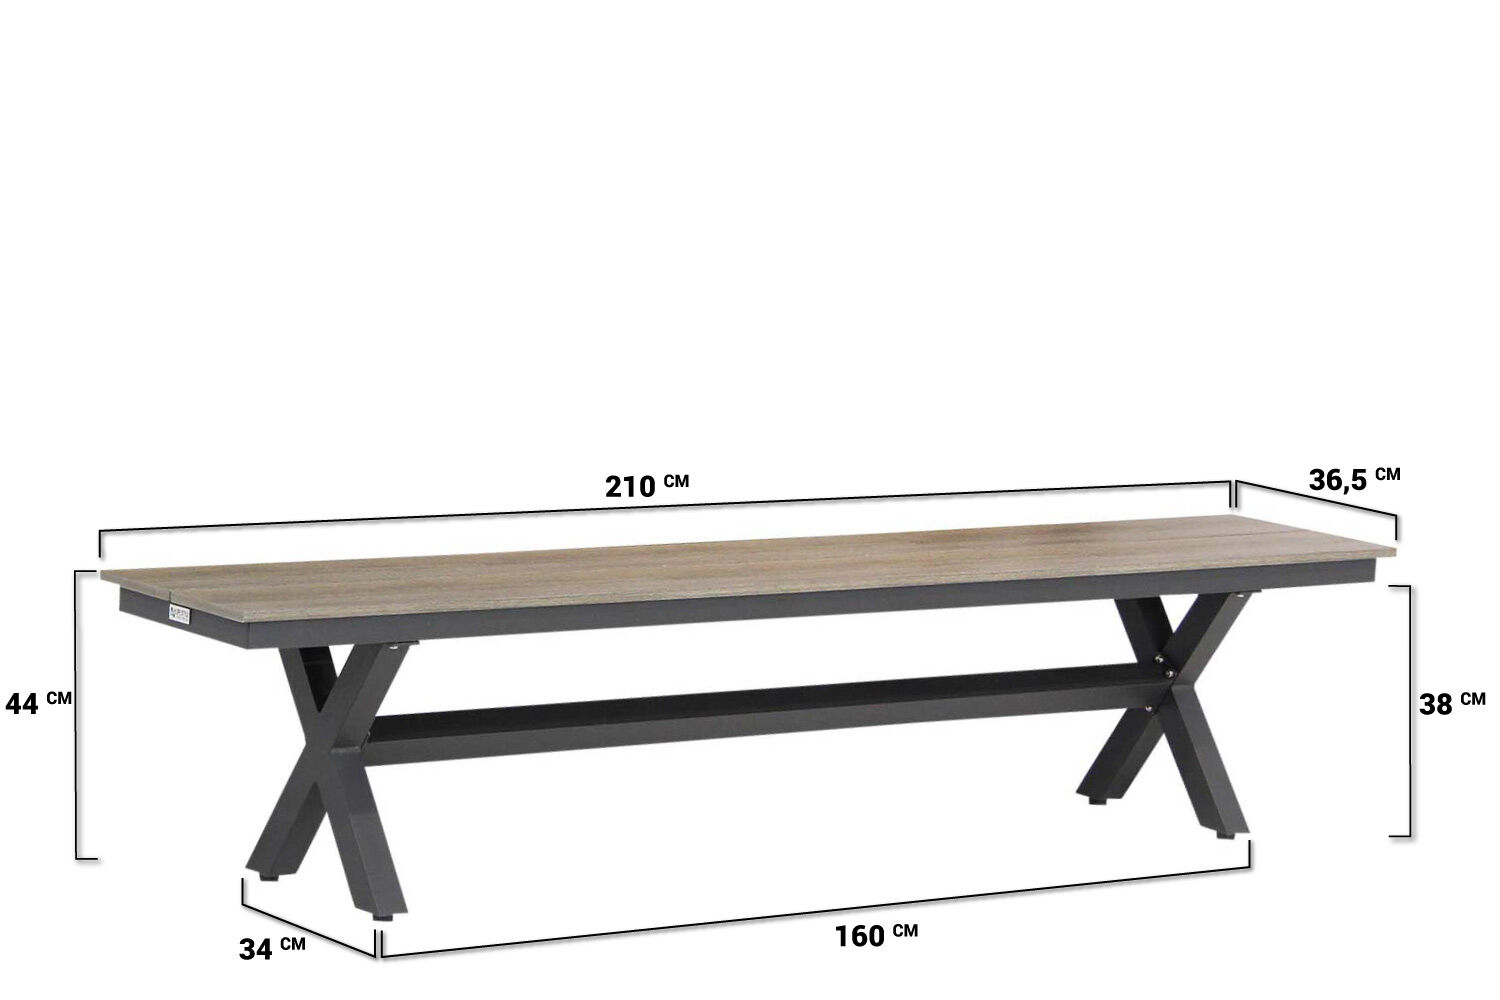 Lifestyle Forest/Forest 240 cm dining tuinset 3-delig